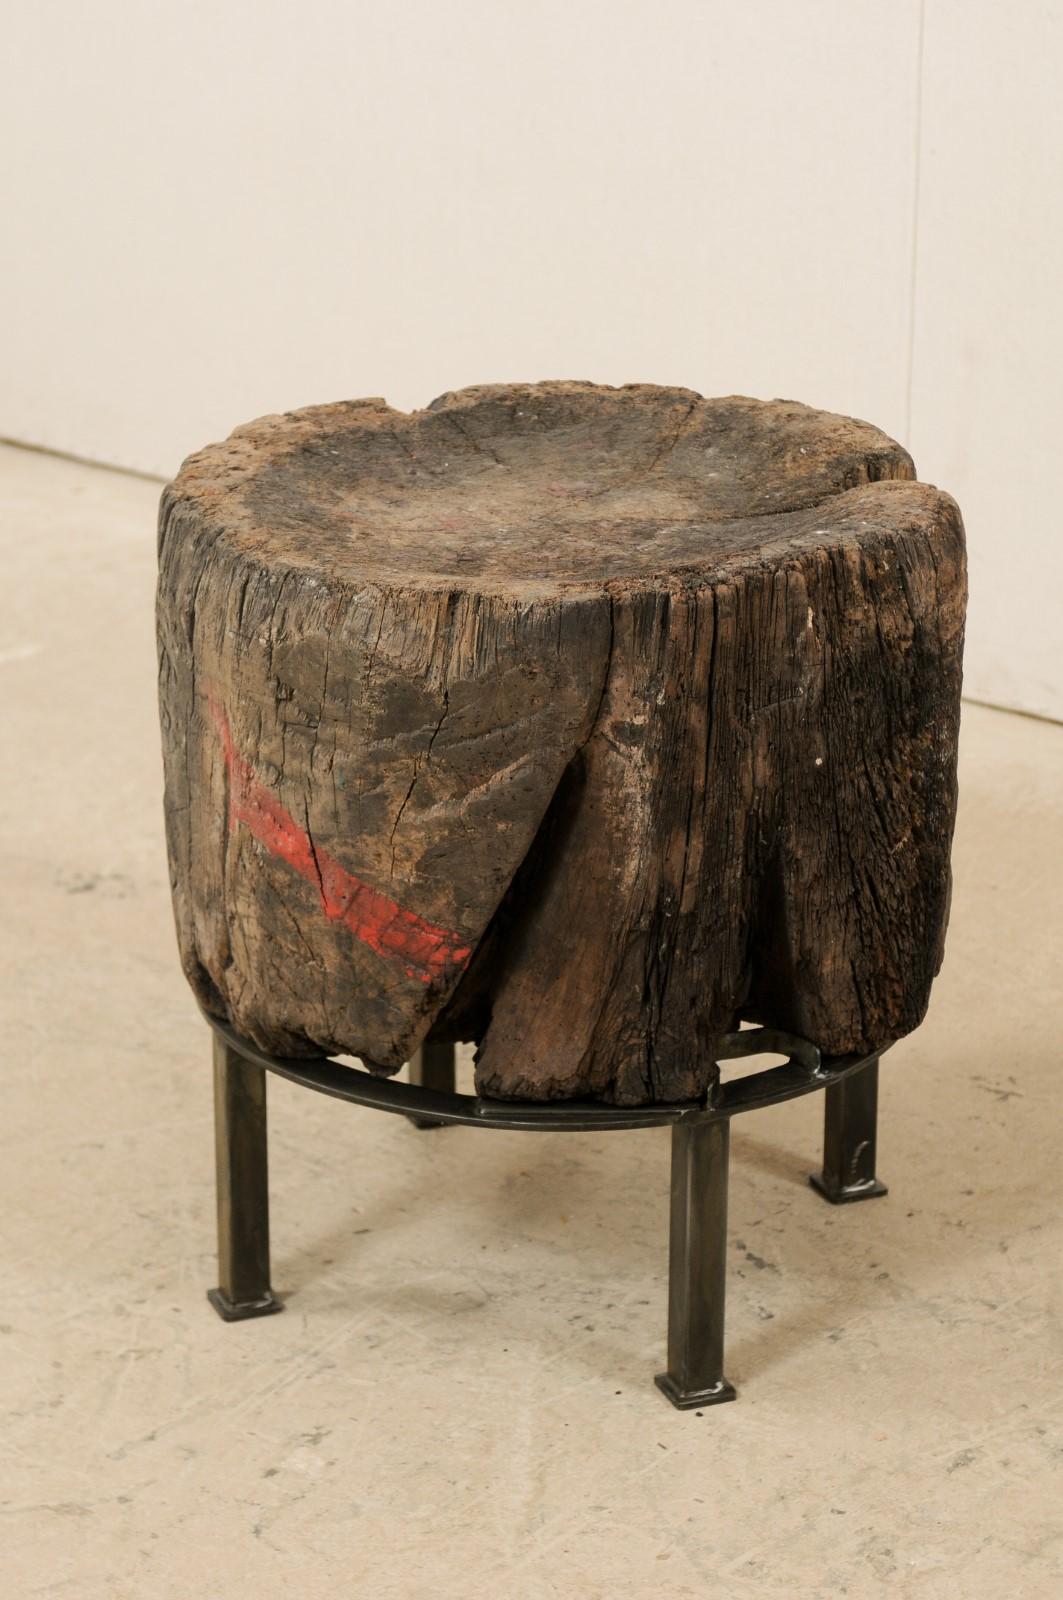 19th Century Custom Designed Side Table from a European Chopping Block with Iron Base